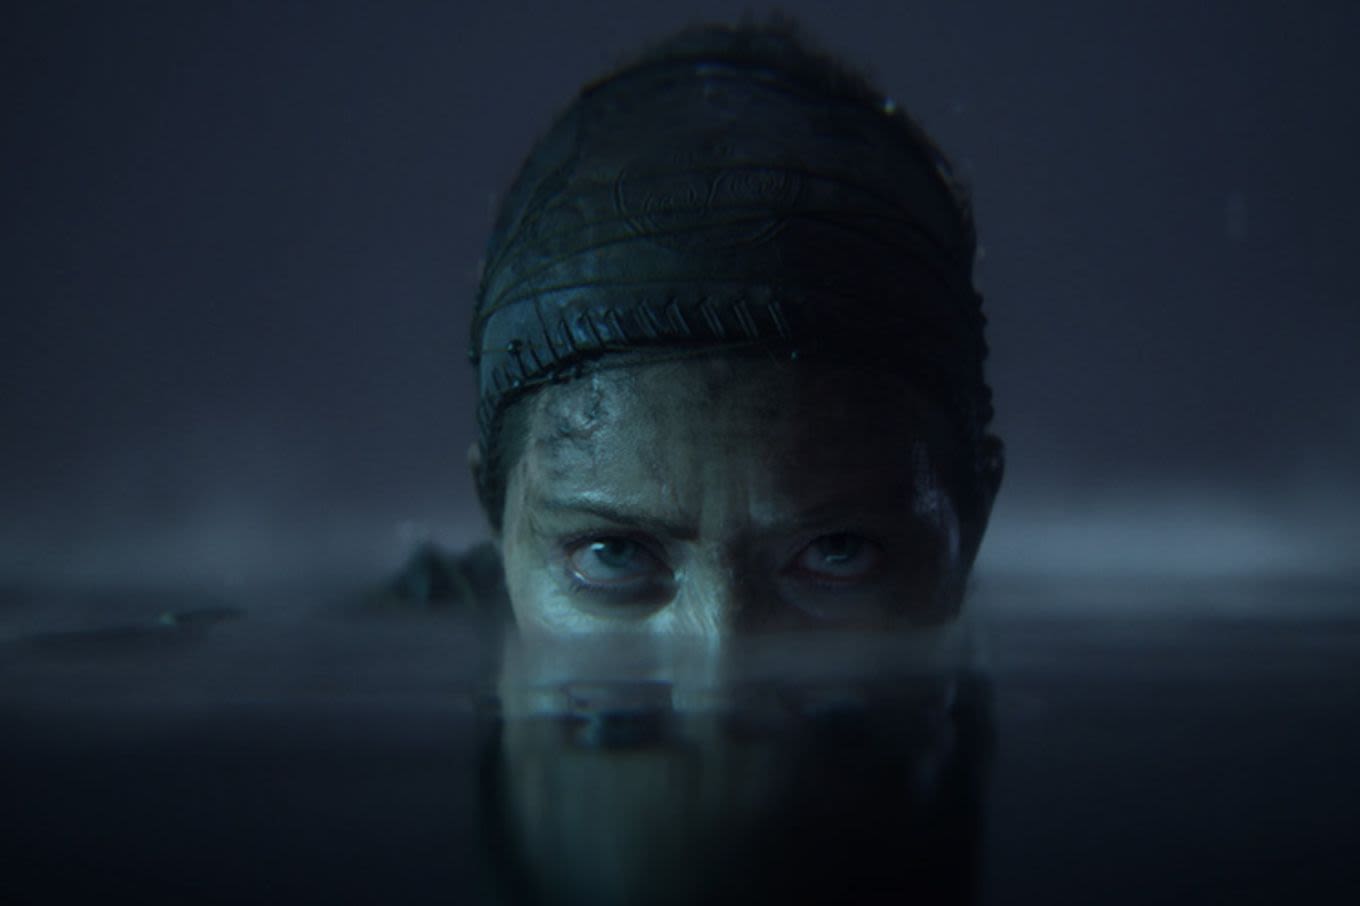 ‘Senua’s Saga: Hellblade II’ Is Now Available: Here’s How To Get the Game Online